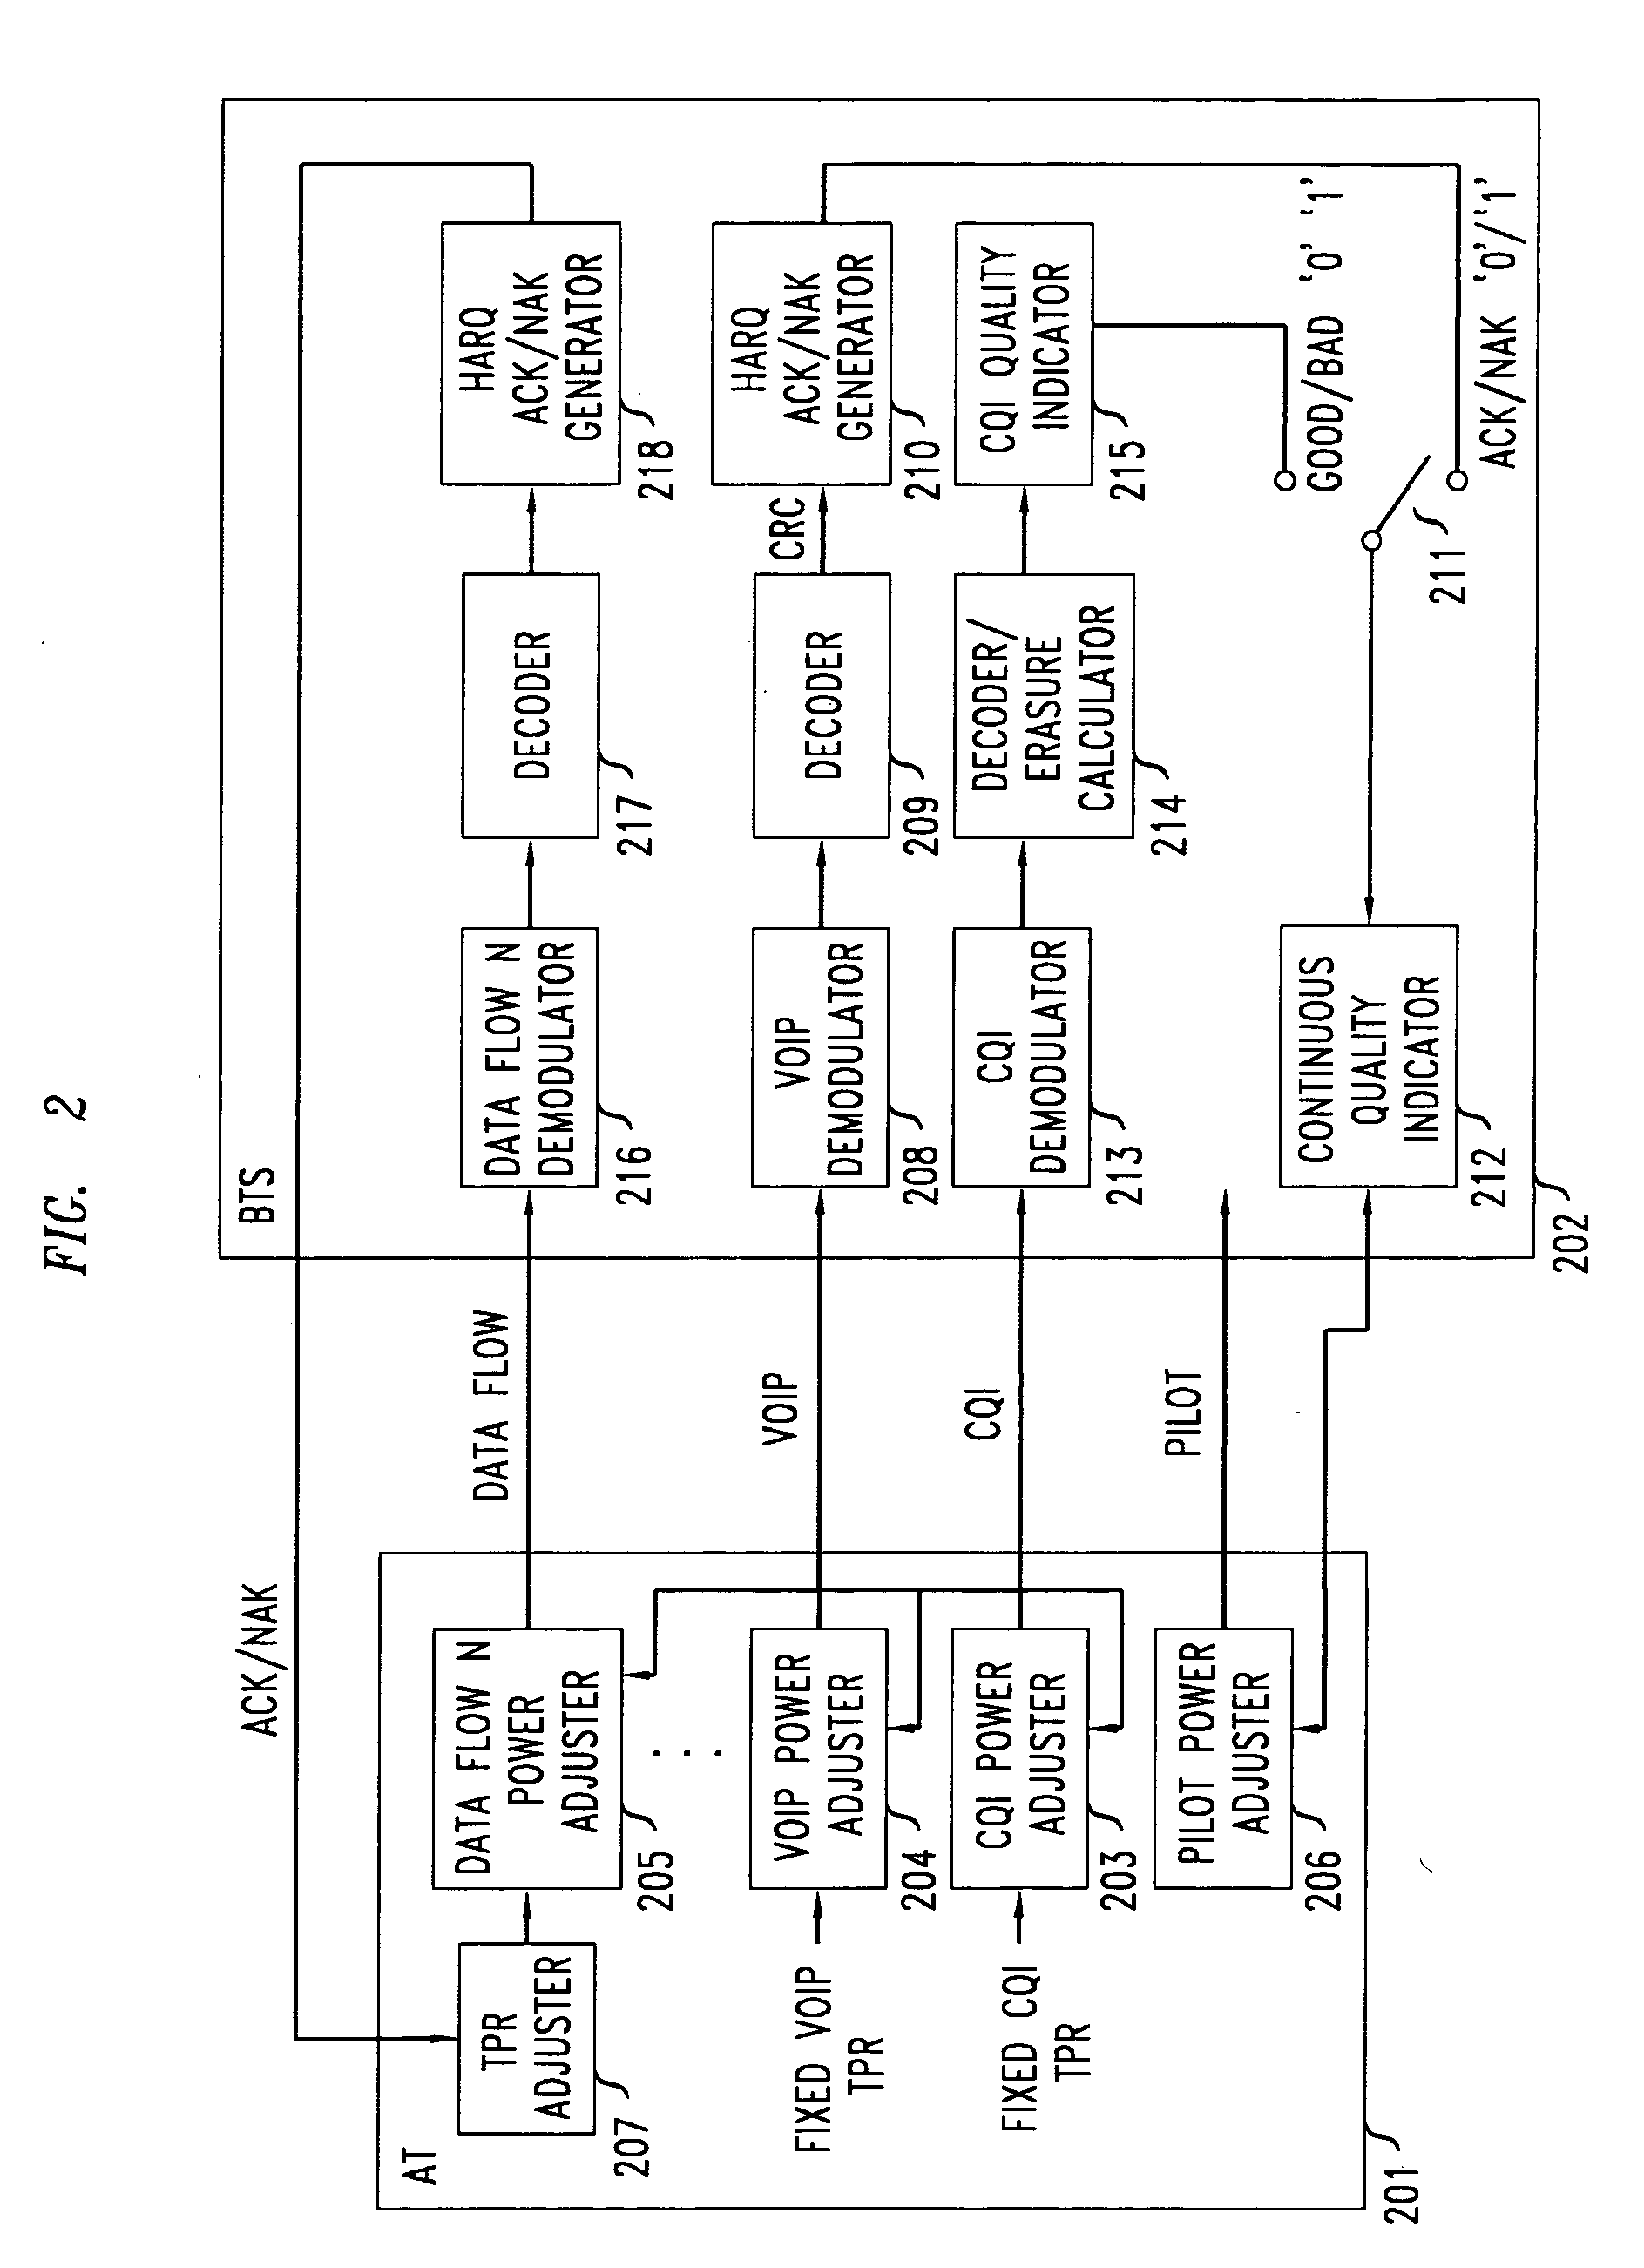 Method of reverse link dynamic power control in a wireless communication system using quality feedback from a delay-sensitive traffic stream or overhead channel